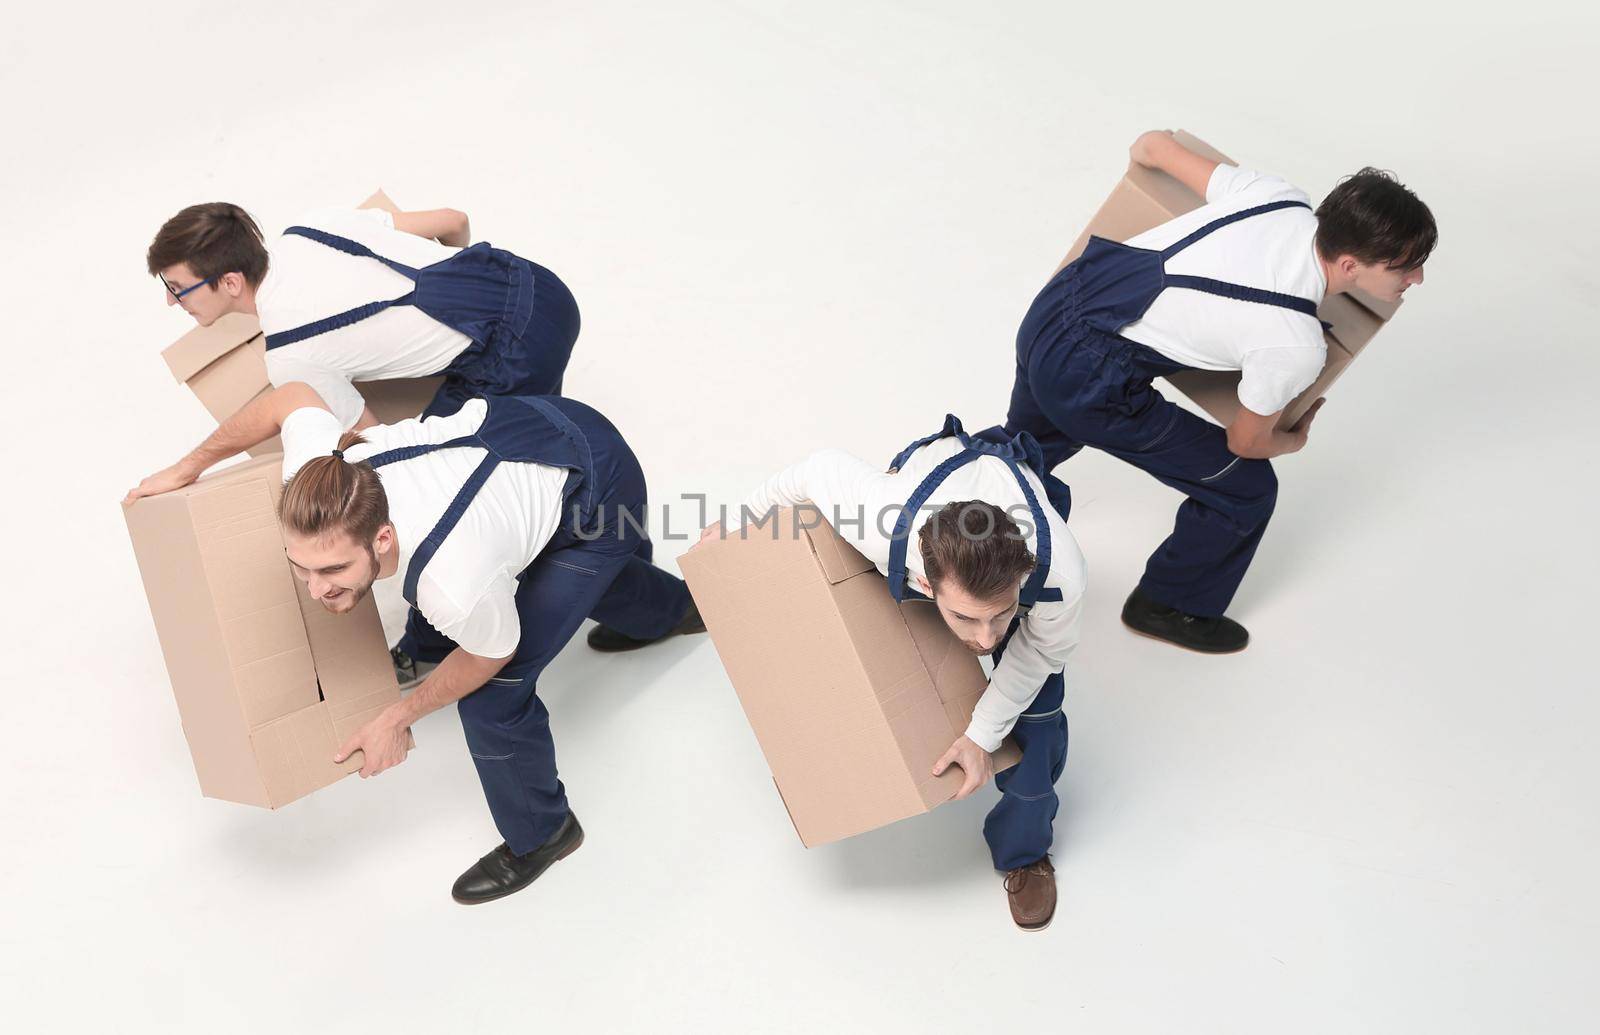 Movers in a hurry to do their job.